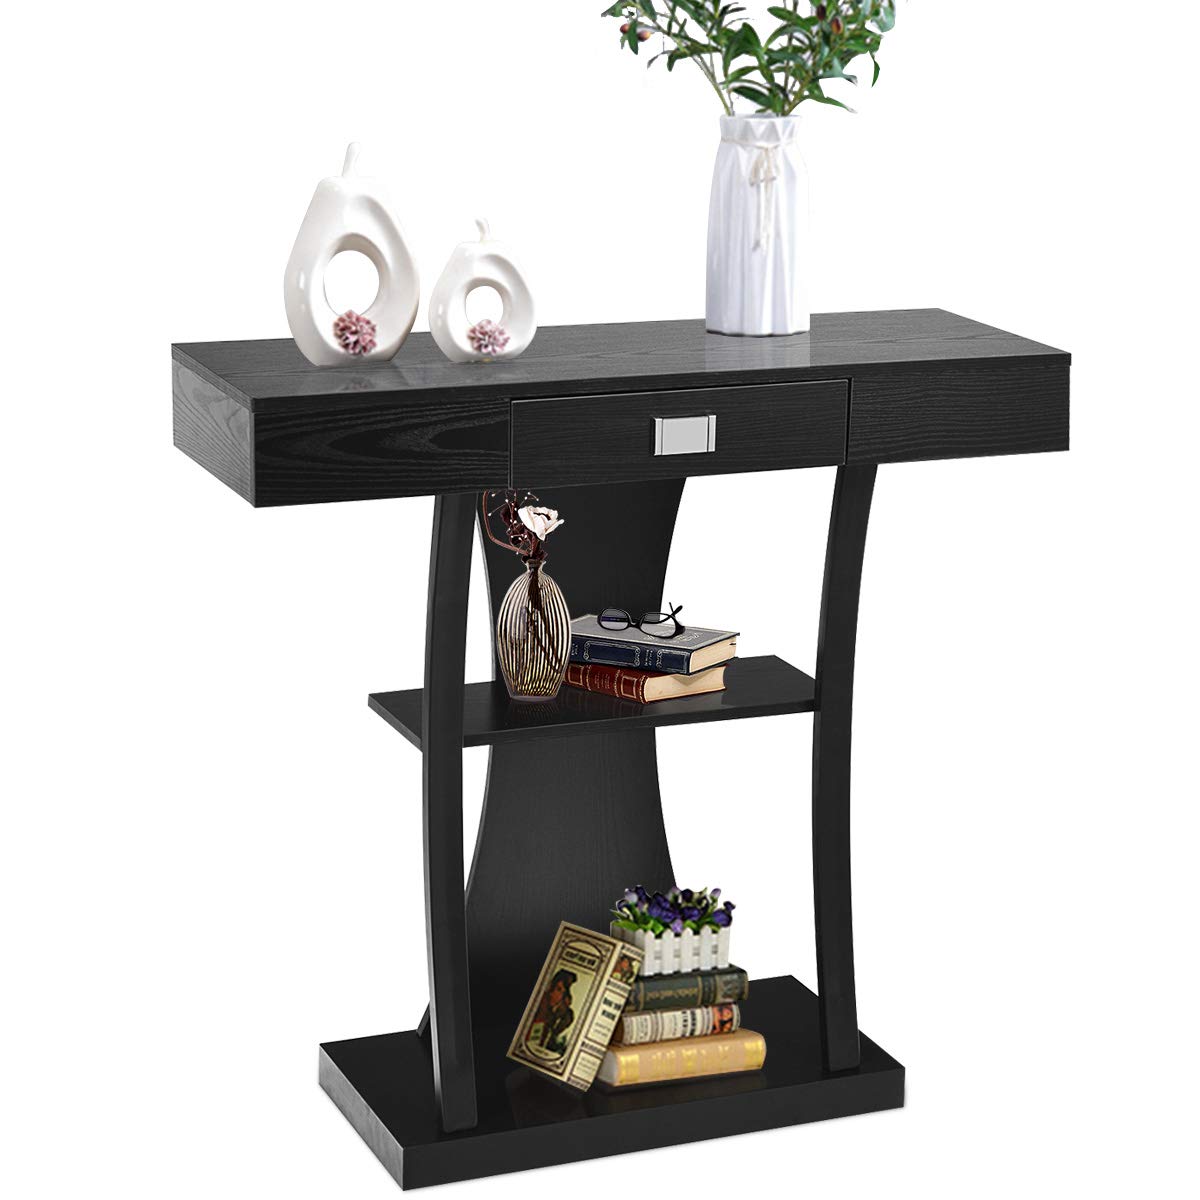 Giantex Console Table, Sofa Table with Drawer and 2-Tier Shelves (Black)